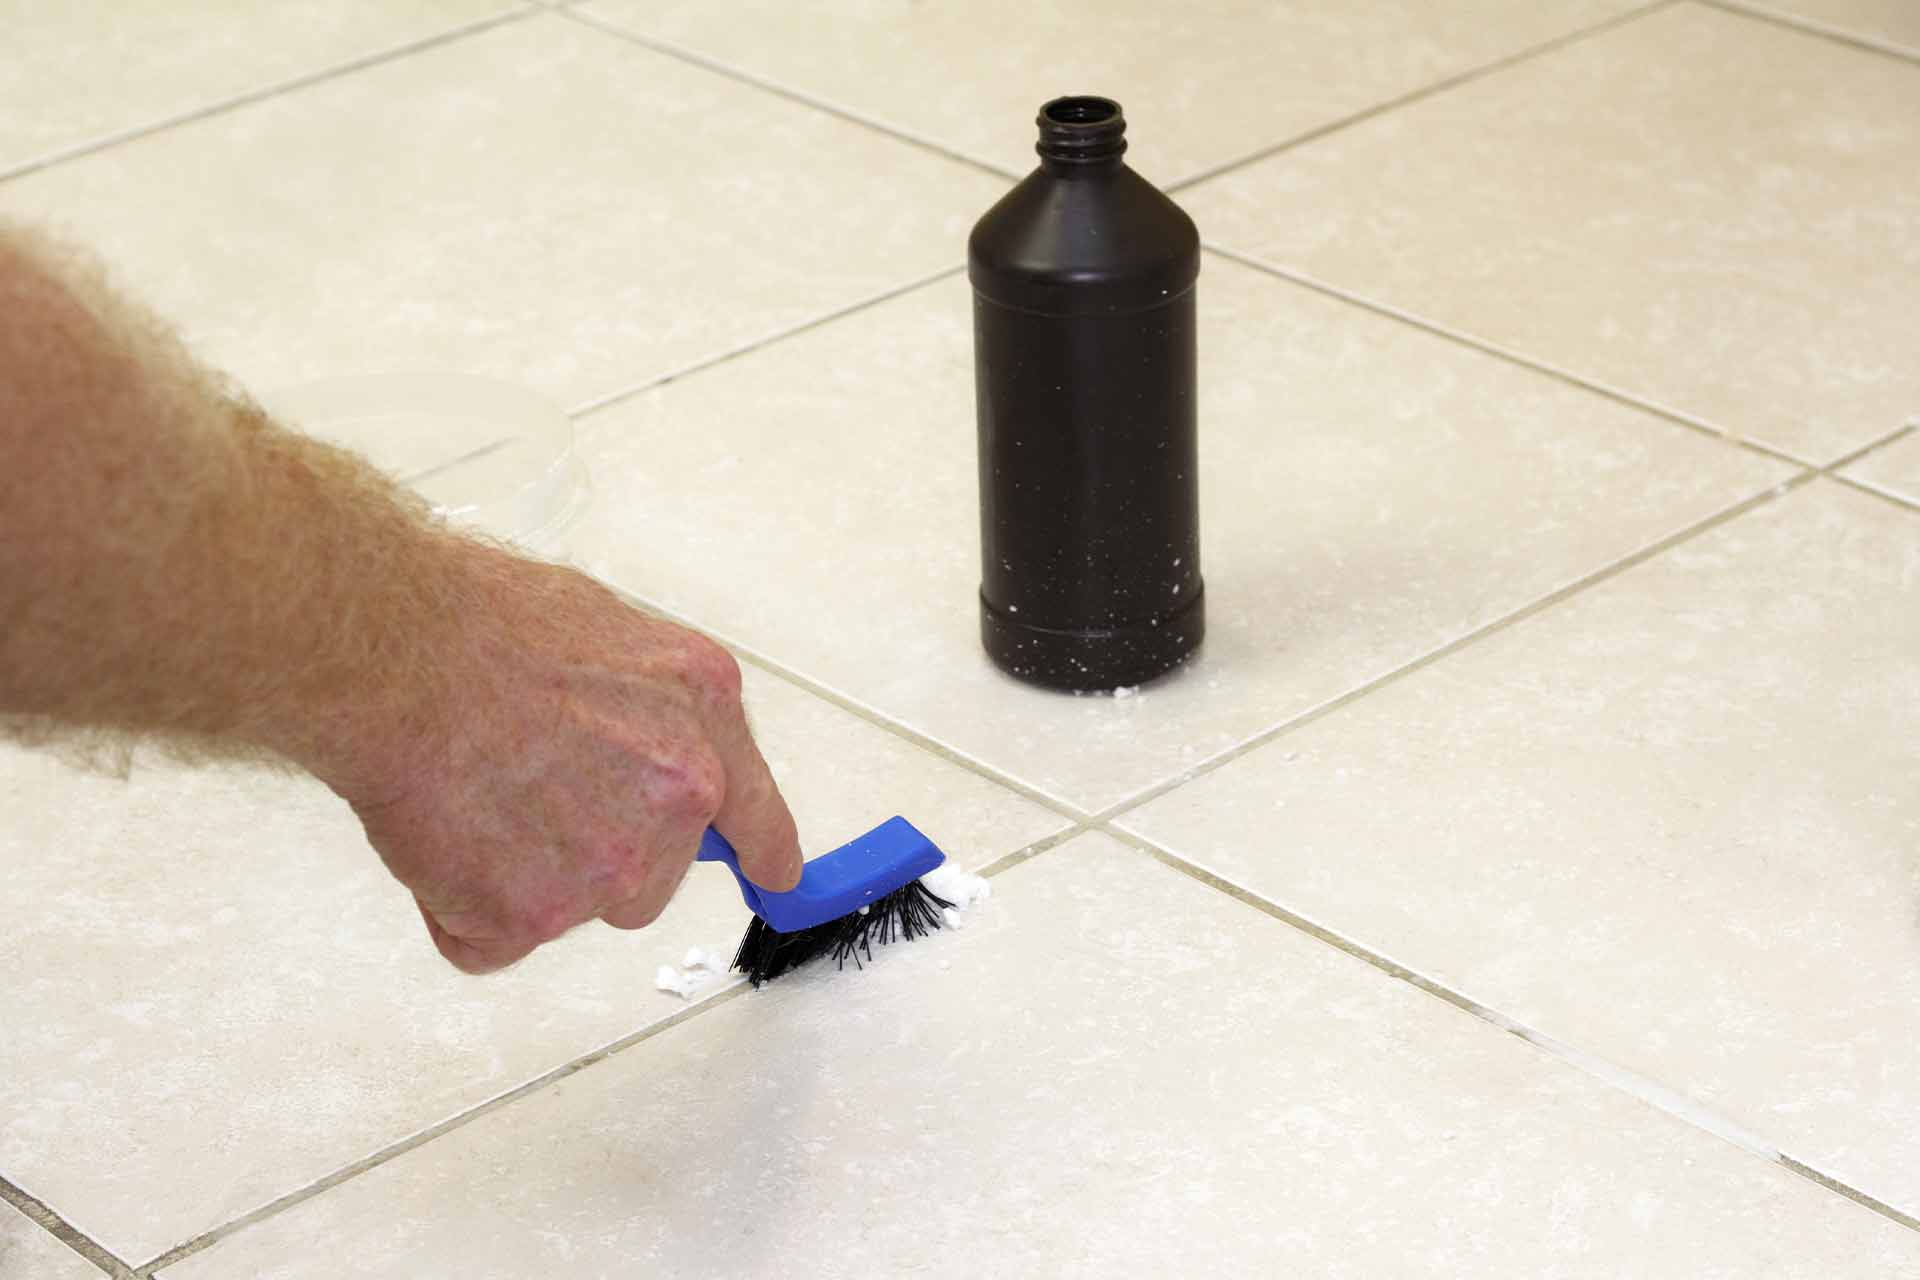 https://www.checkatrade.com/blog/wp-content/uploads/2021/05/tile-cleaning-featured.jpg